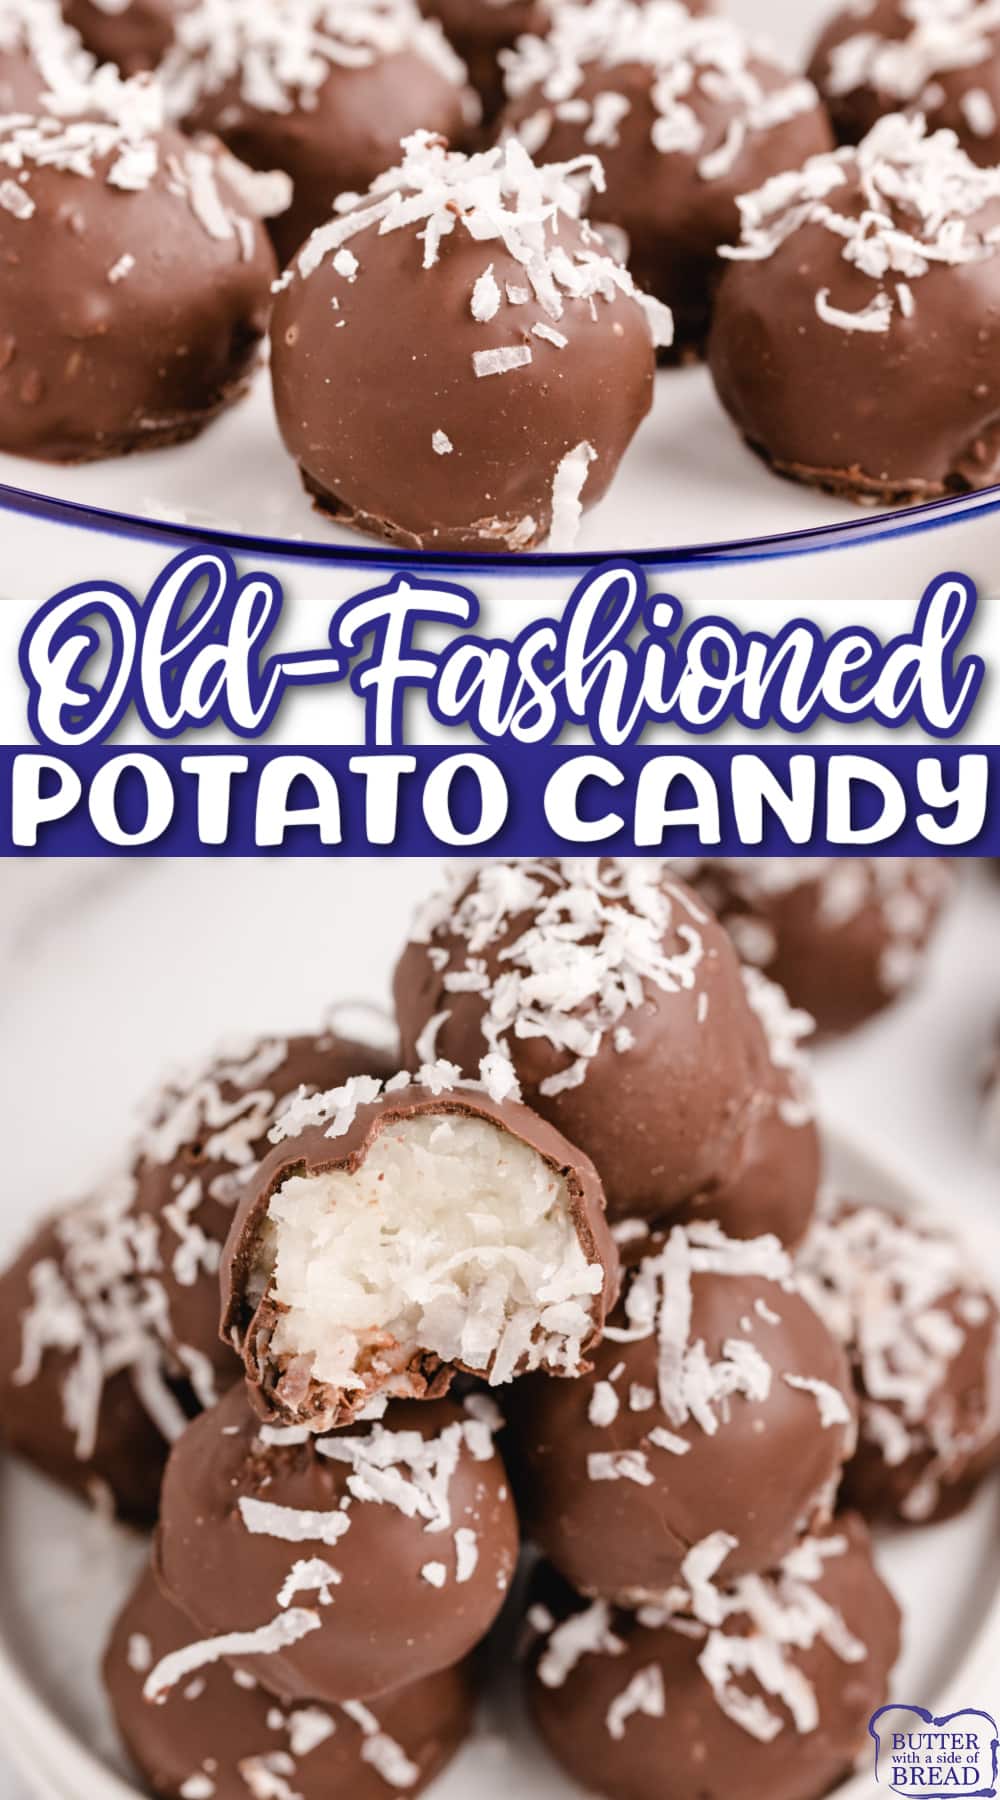 Old Fashioned Potato Candy recipe made with mashed potatoes tastes like a Mounds bar! Only 5 ingredients to make this delicious chocolate covered potato candy. 